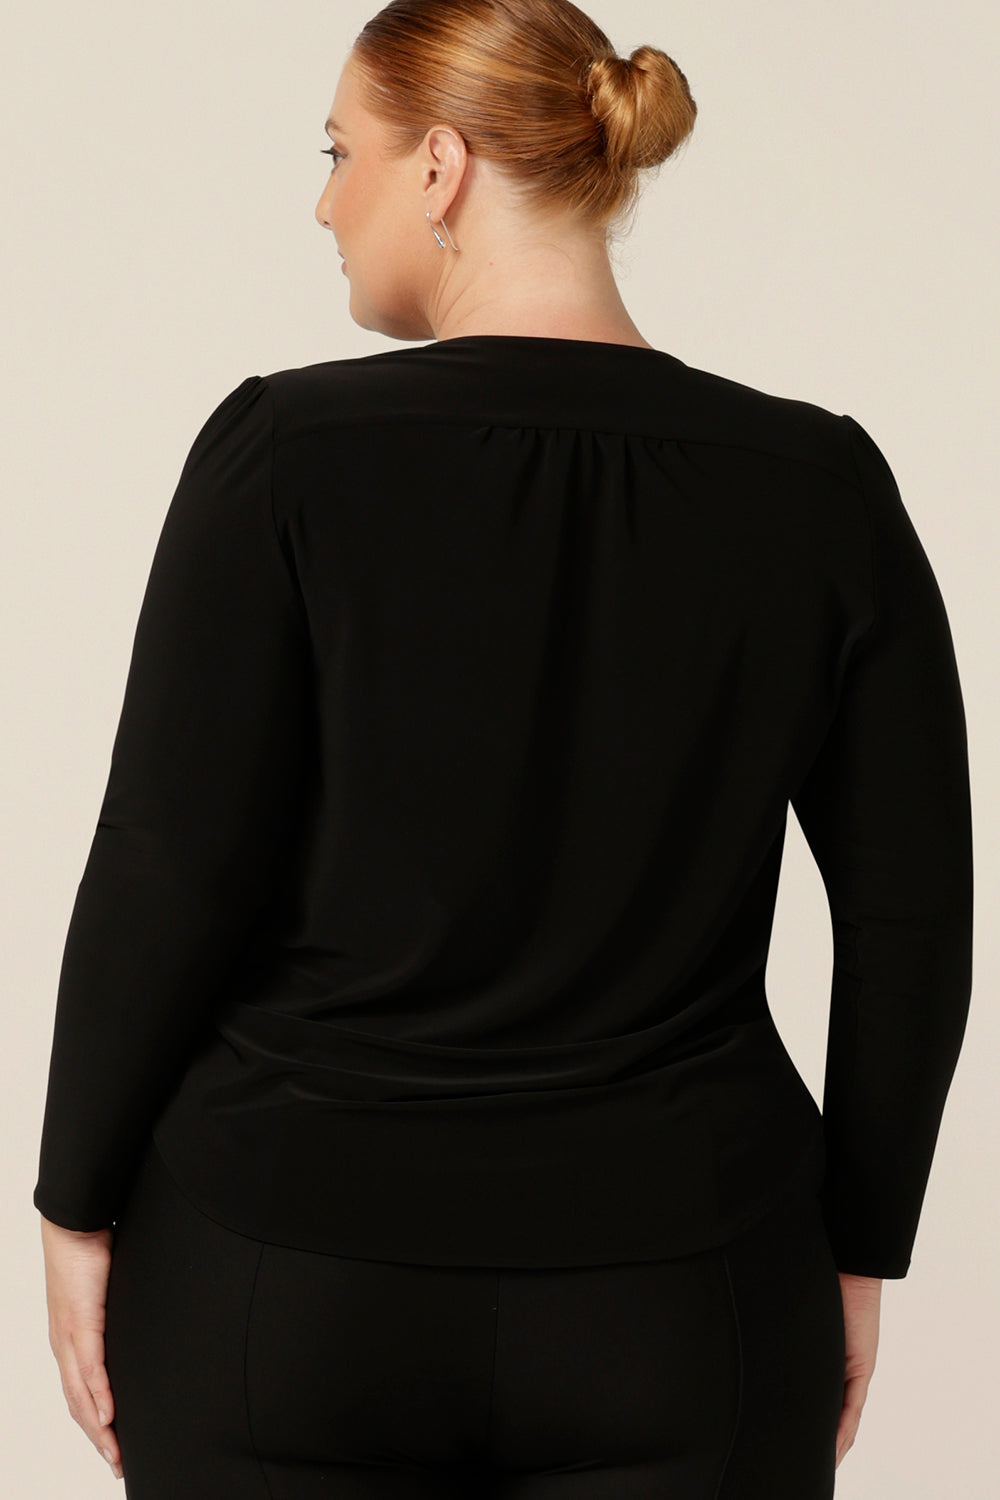 Back view of a size 18, fuller figure woman wearing a long sleeve, V neck top in black jersey. A comfortable top for corporate or casual wear, this classic women's black top is made in Australia by Australia and New Zealand women's clothing label, elarroyoenterprises.